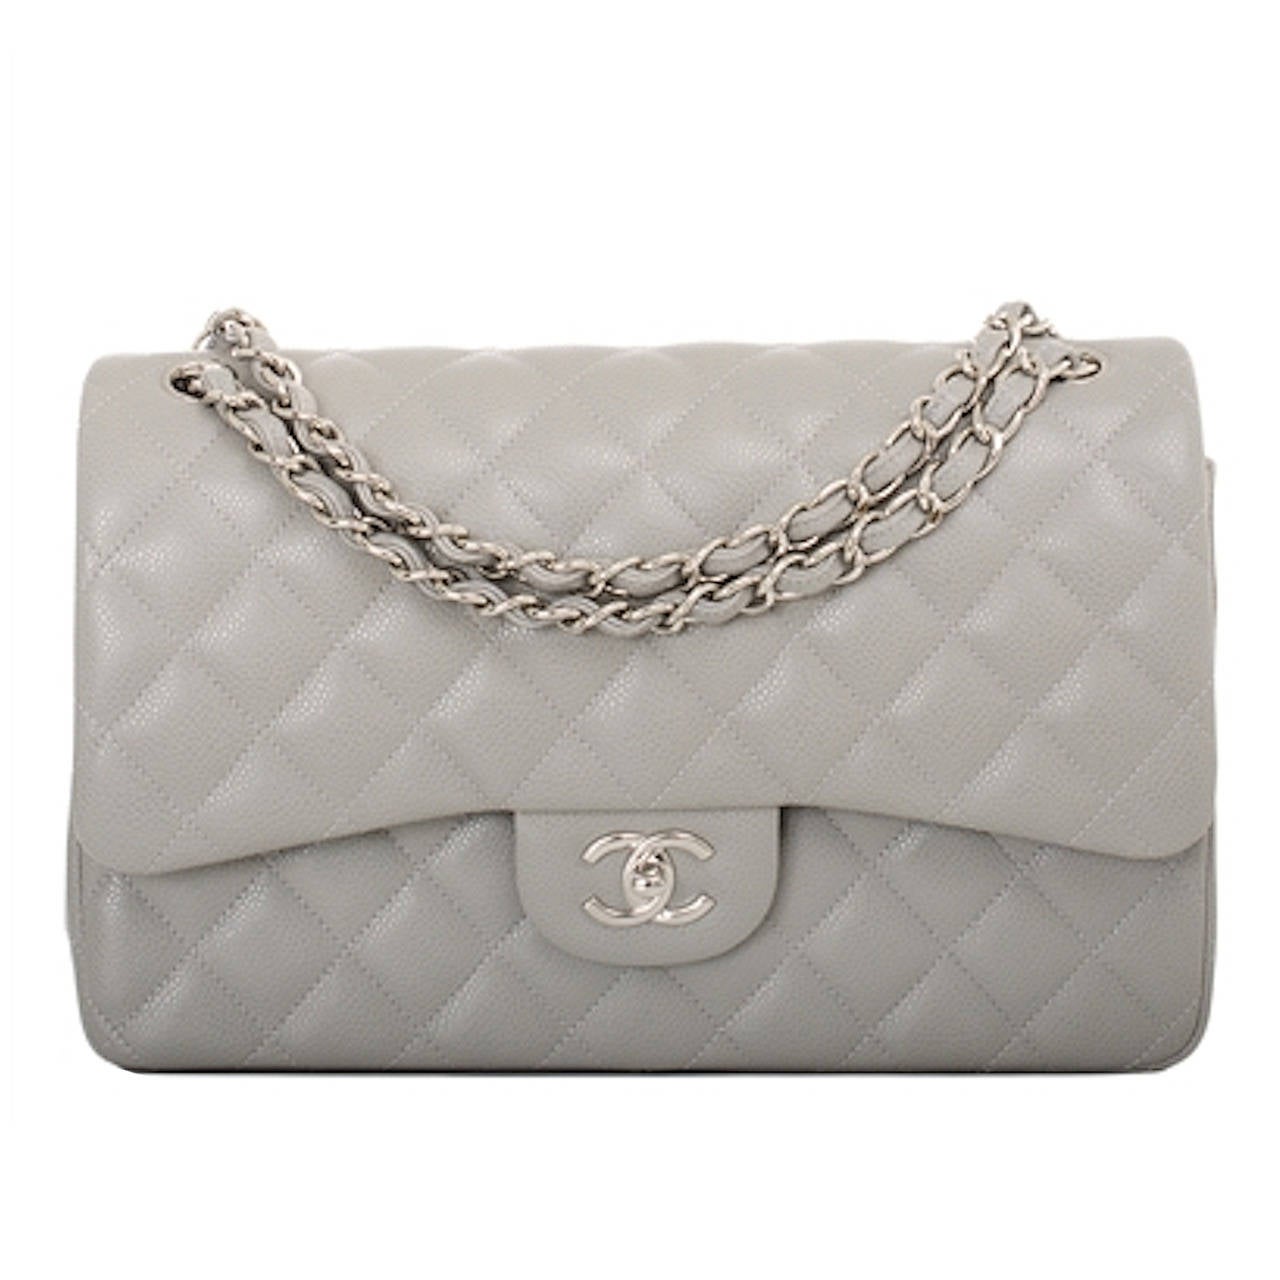 Chanel Light Grey Quilted Caviar Jumbo Classic Double Flap Bag